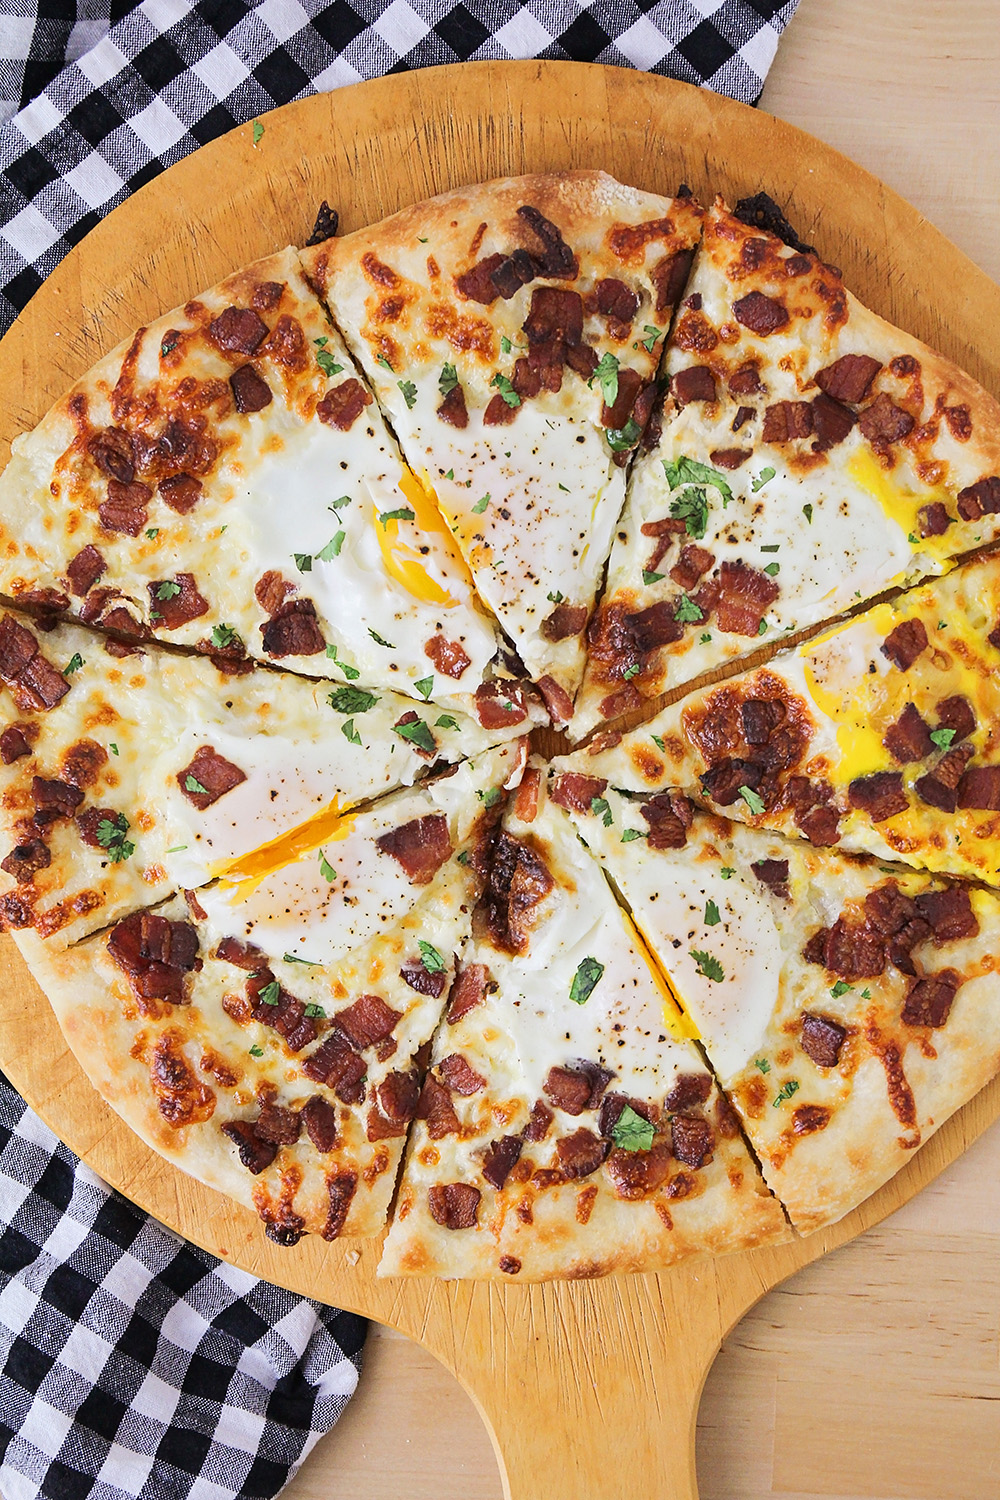 This bacon breakfast pizza is perfect for any meal of the day! It's so flavorful and delicious, and easy to make too!